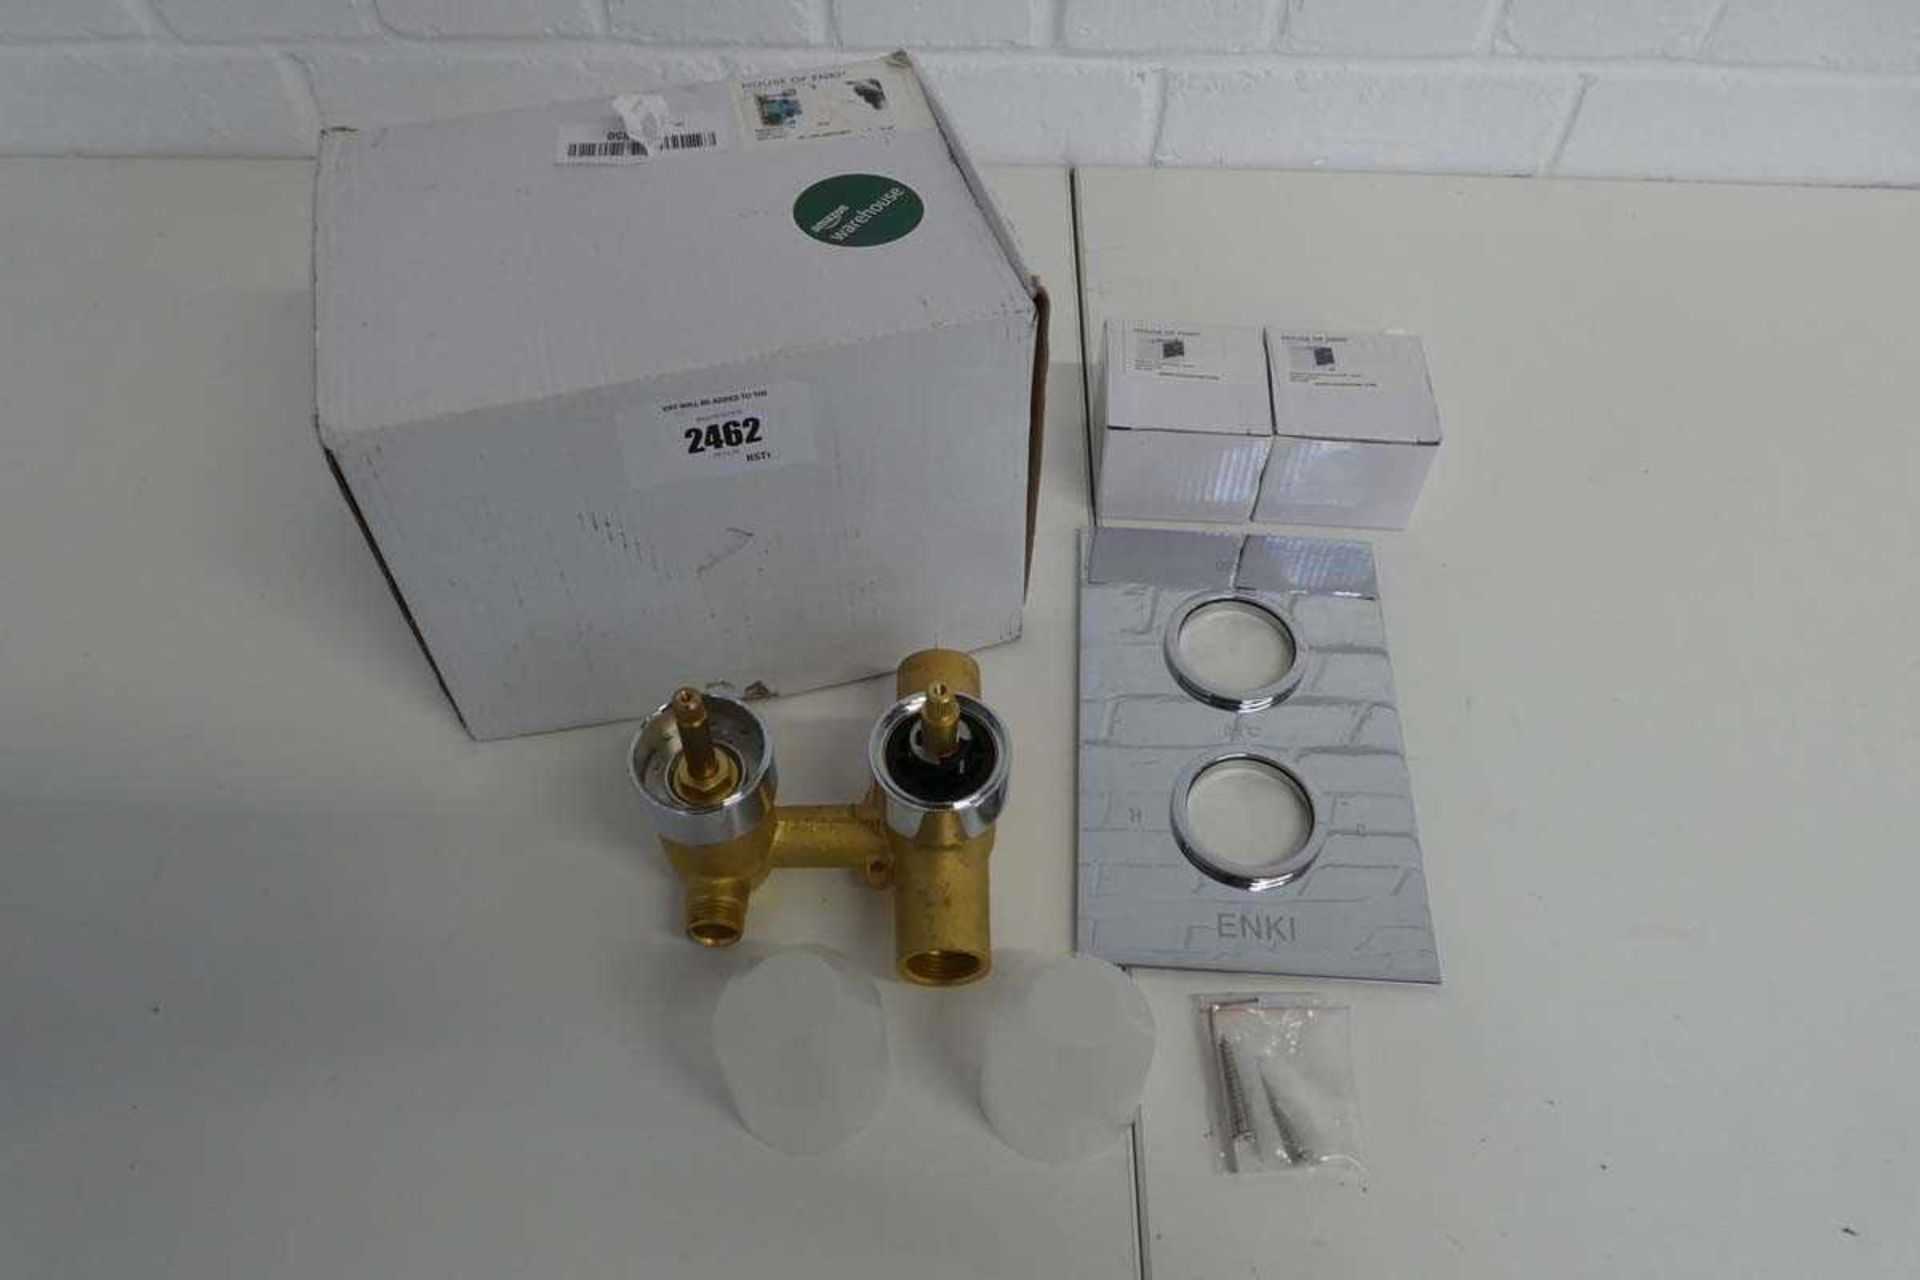 +VAT Boxed House of Enki wall mounted shower tap